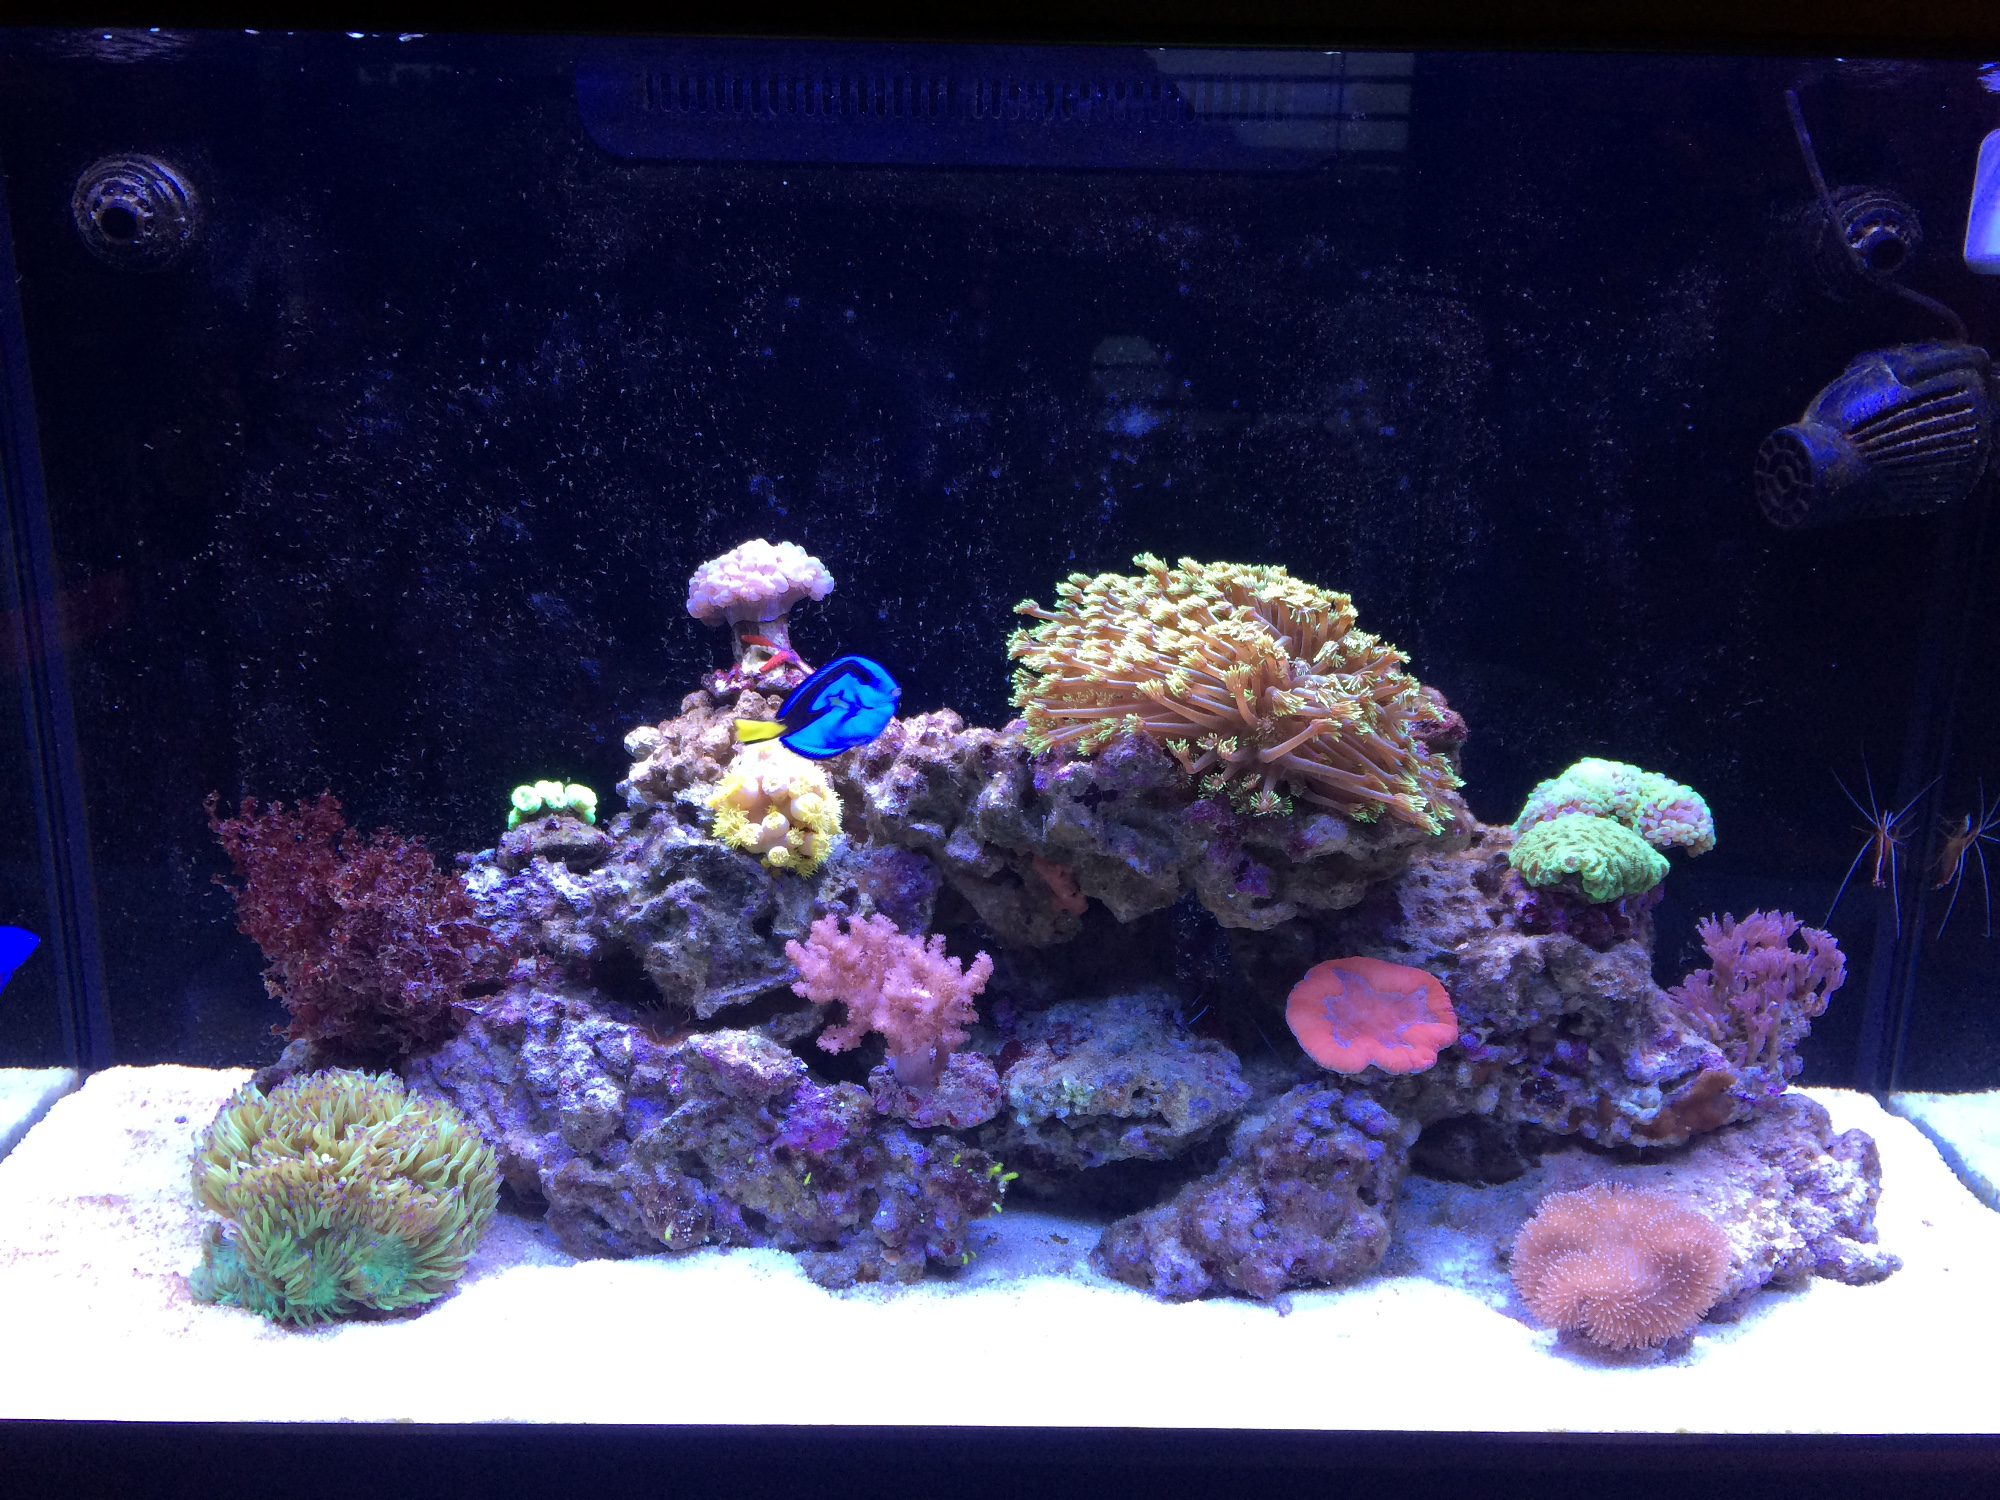 The reef #1